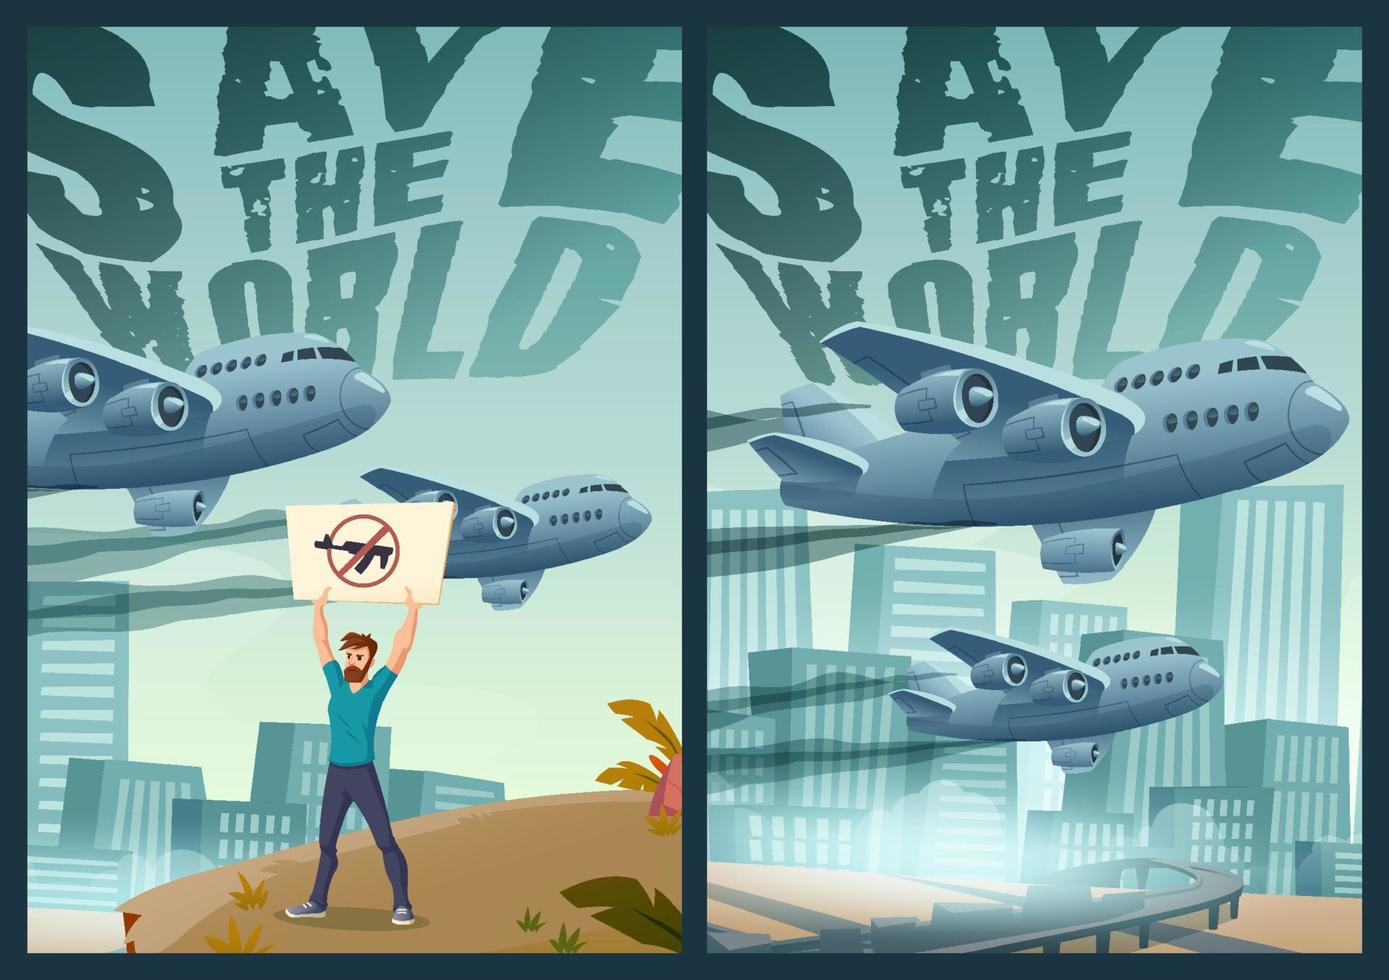 Save the world cartoon posters, stop war concept vector